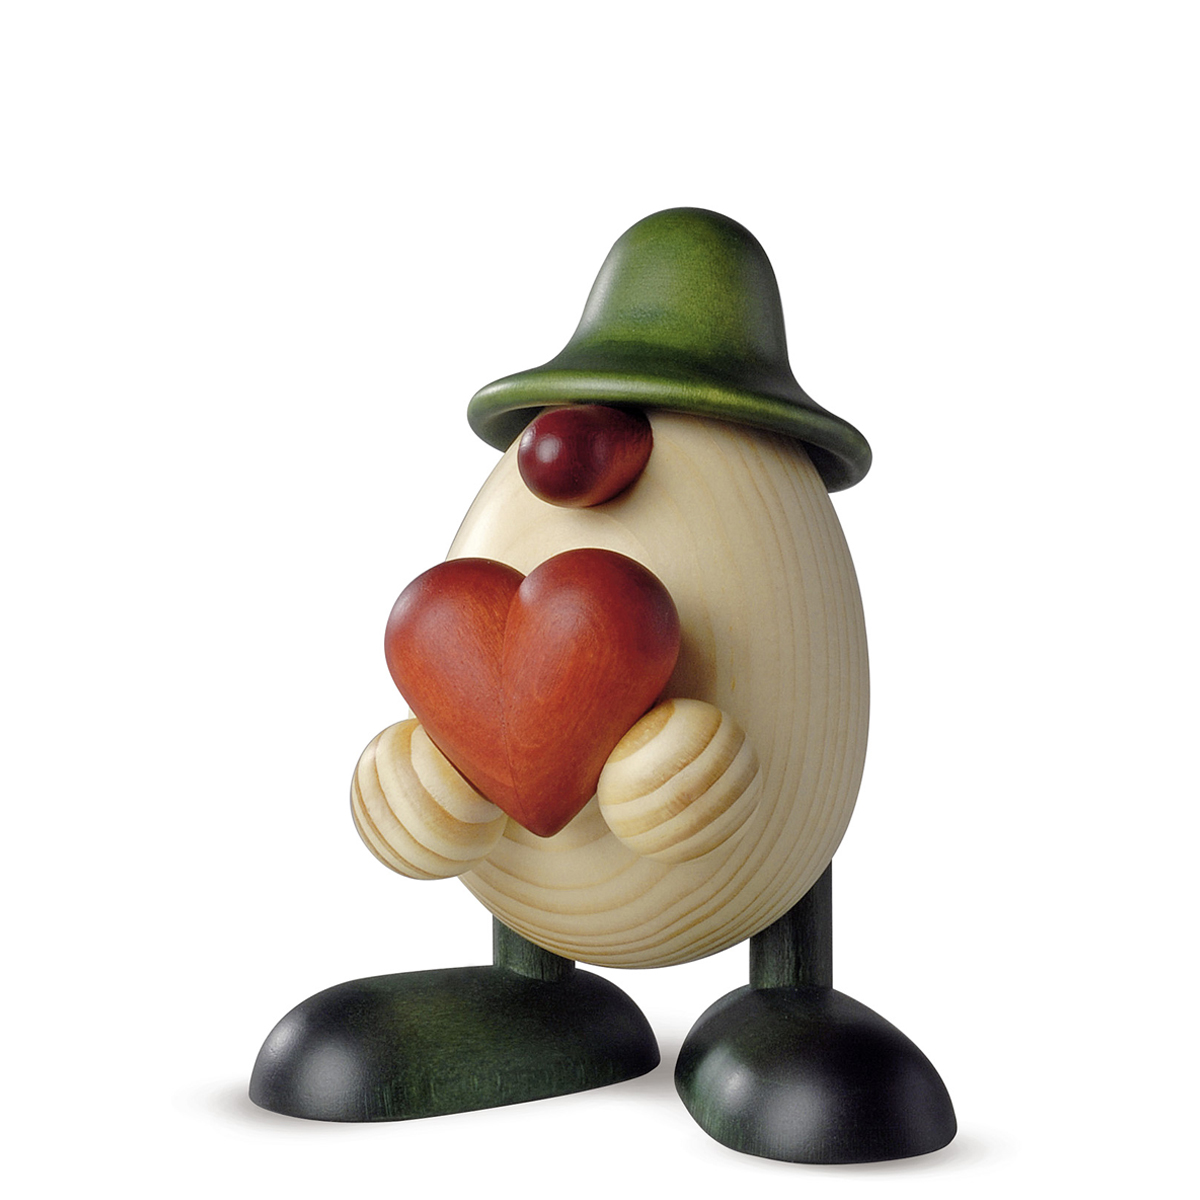 Egghead Hanno with a heart, green